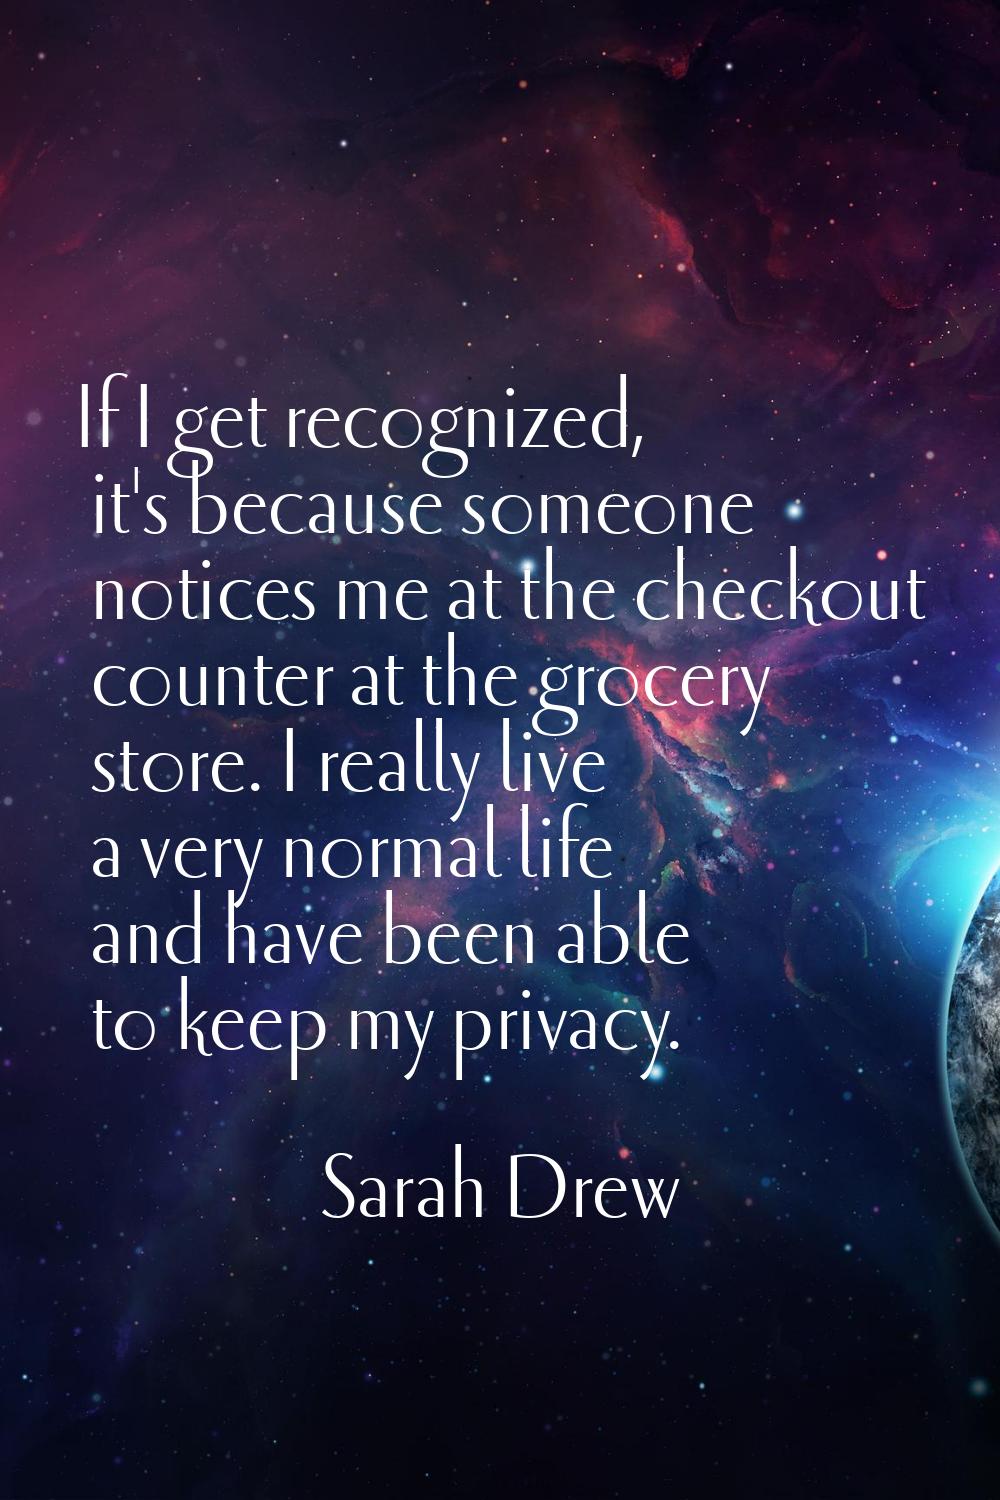 If I get recognized, it's because someone notices me at the checkout counter at the grocery store. 